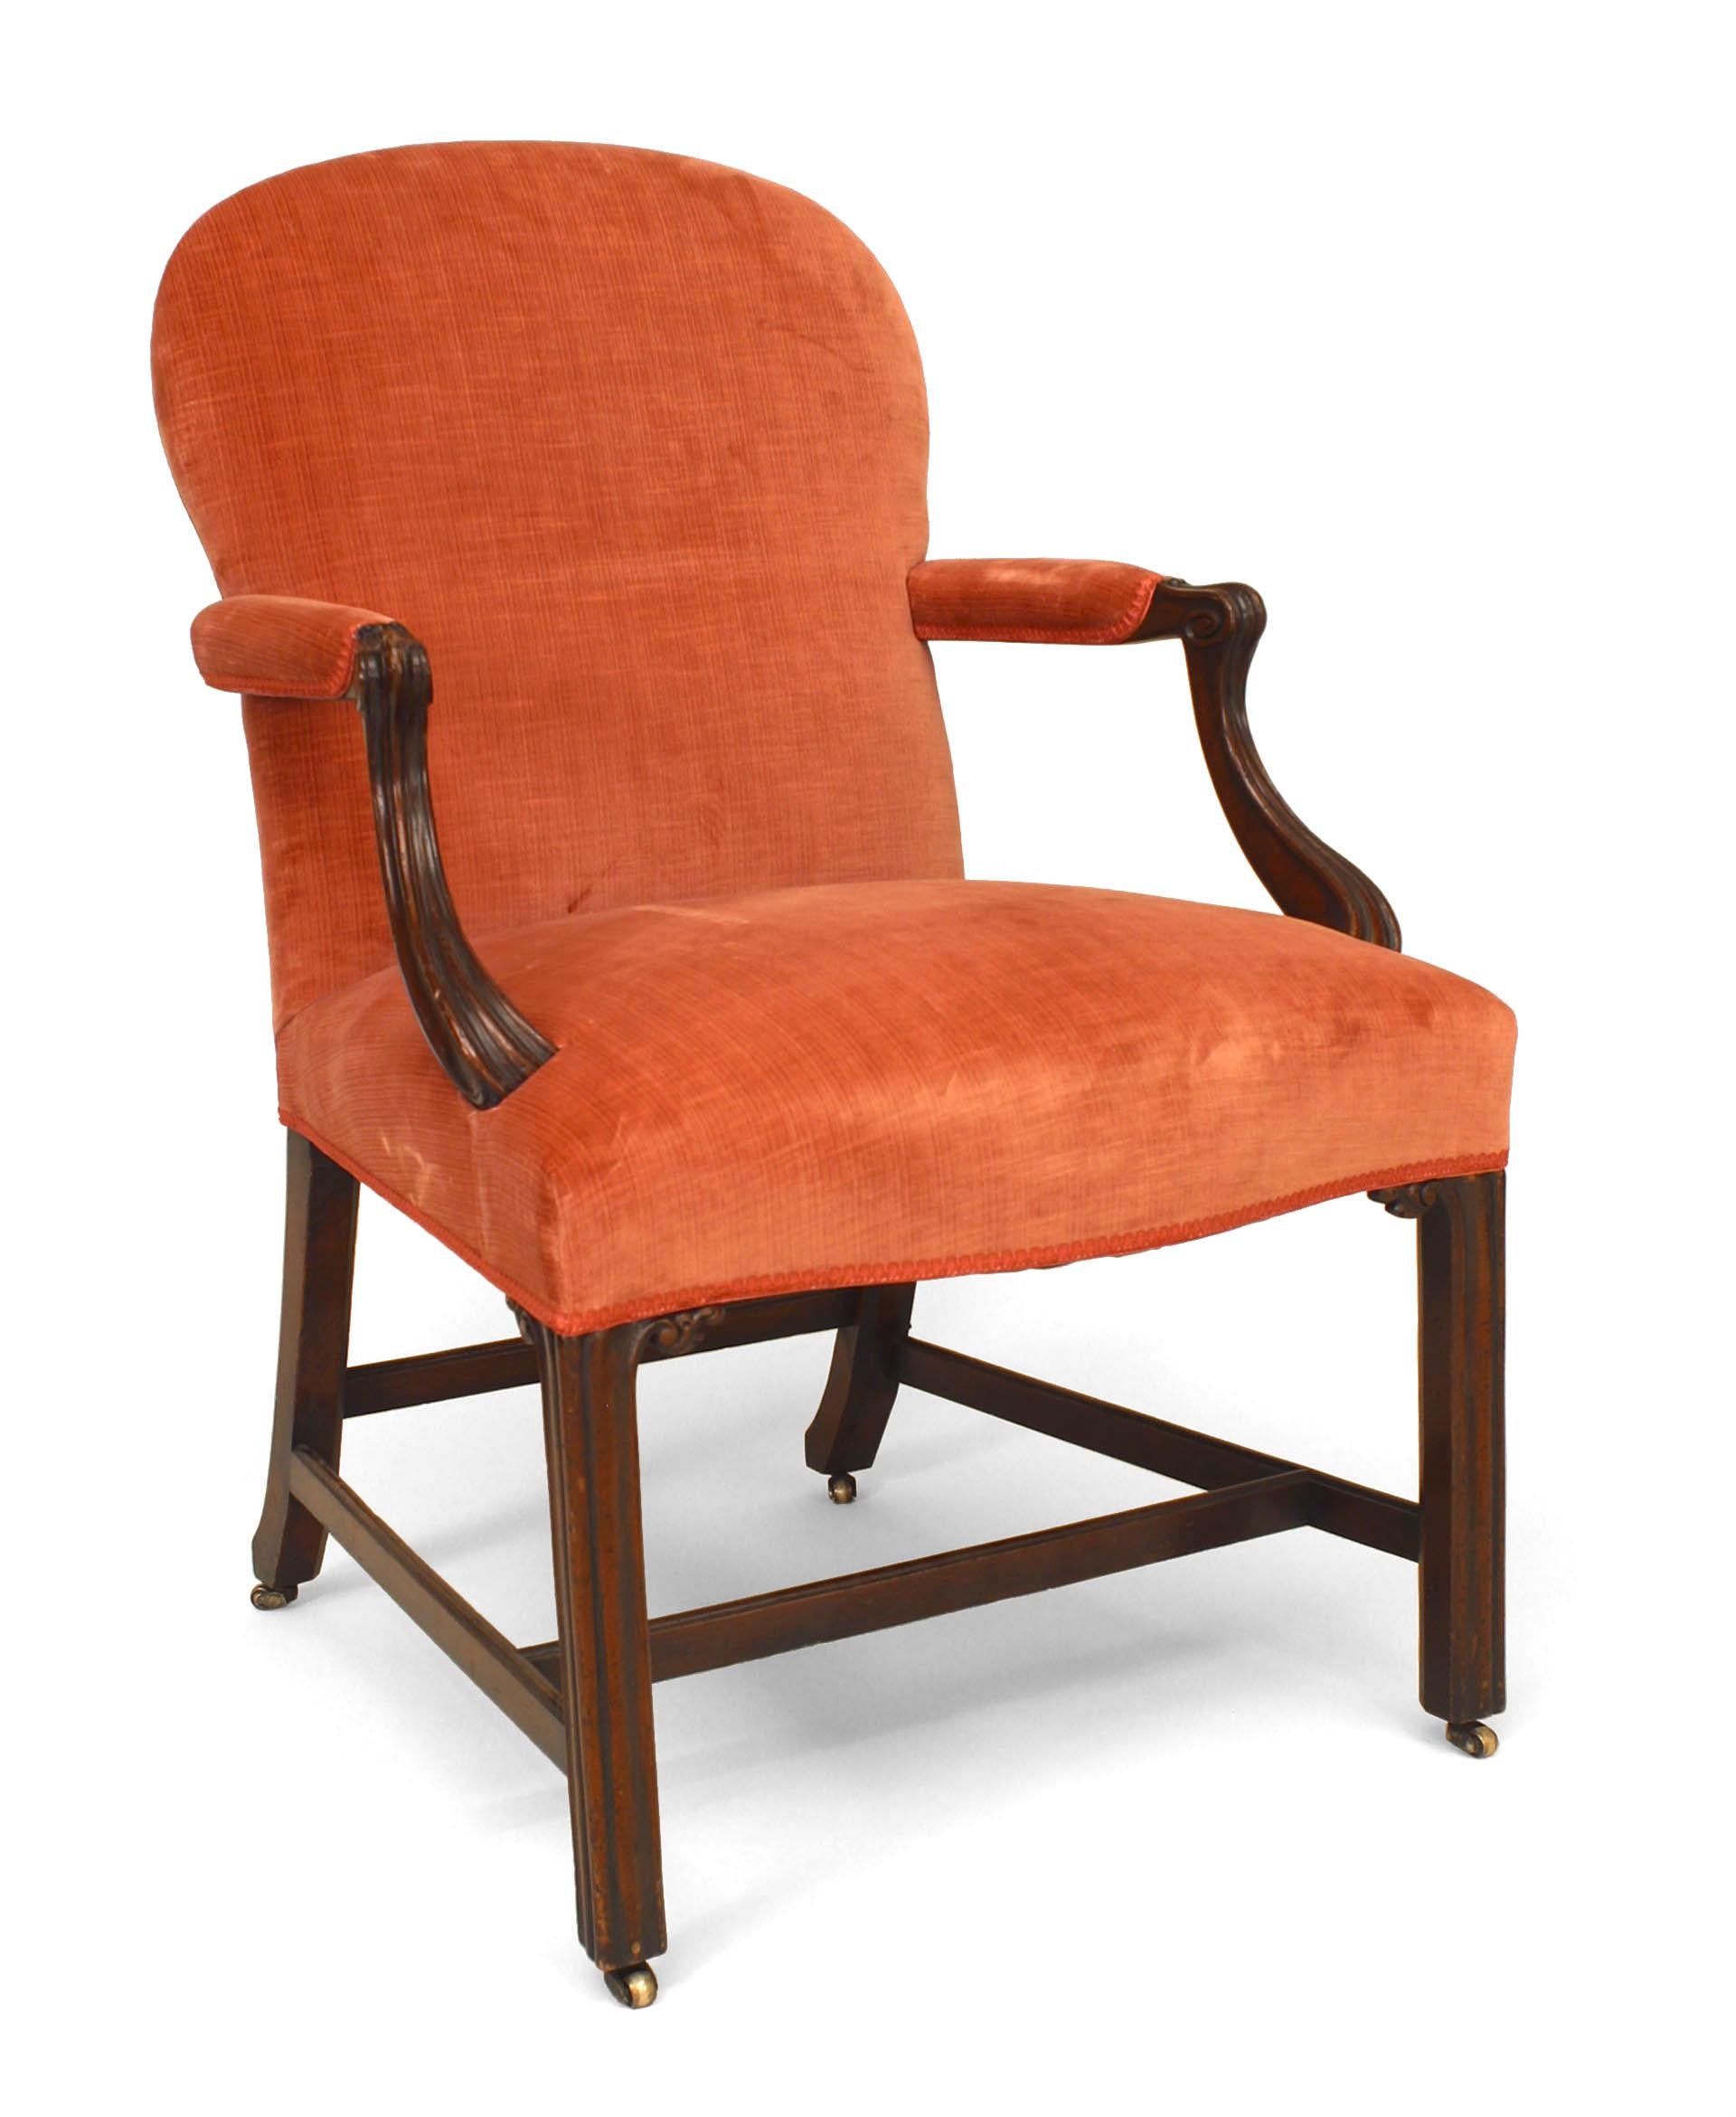 Set of fourteen Georgian mahogany chairs including ten side chairs and four armchairs. Each chair is upholstered in salmon-colored velvet and features a rounded back and seat, carved corners, and a rectangular stretcher base.